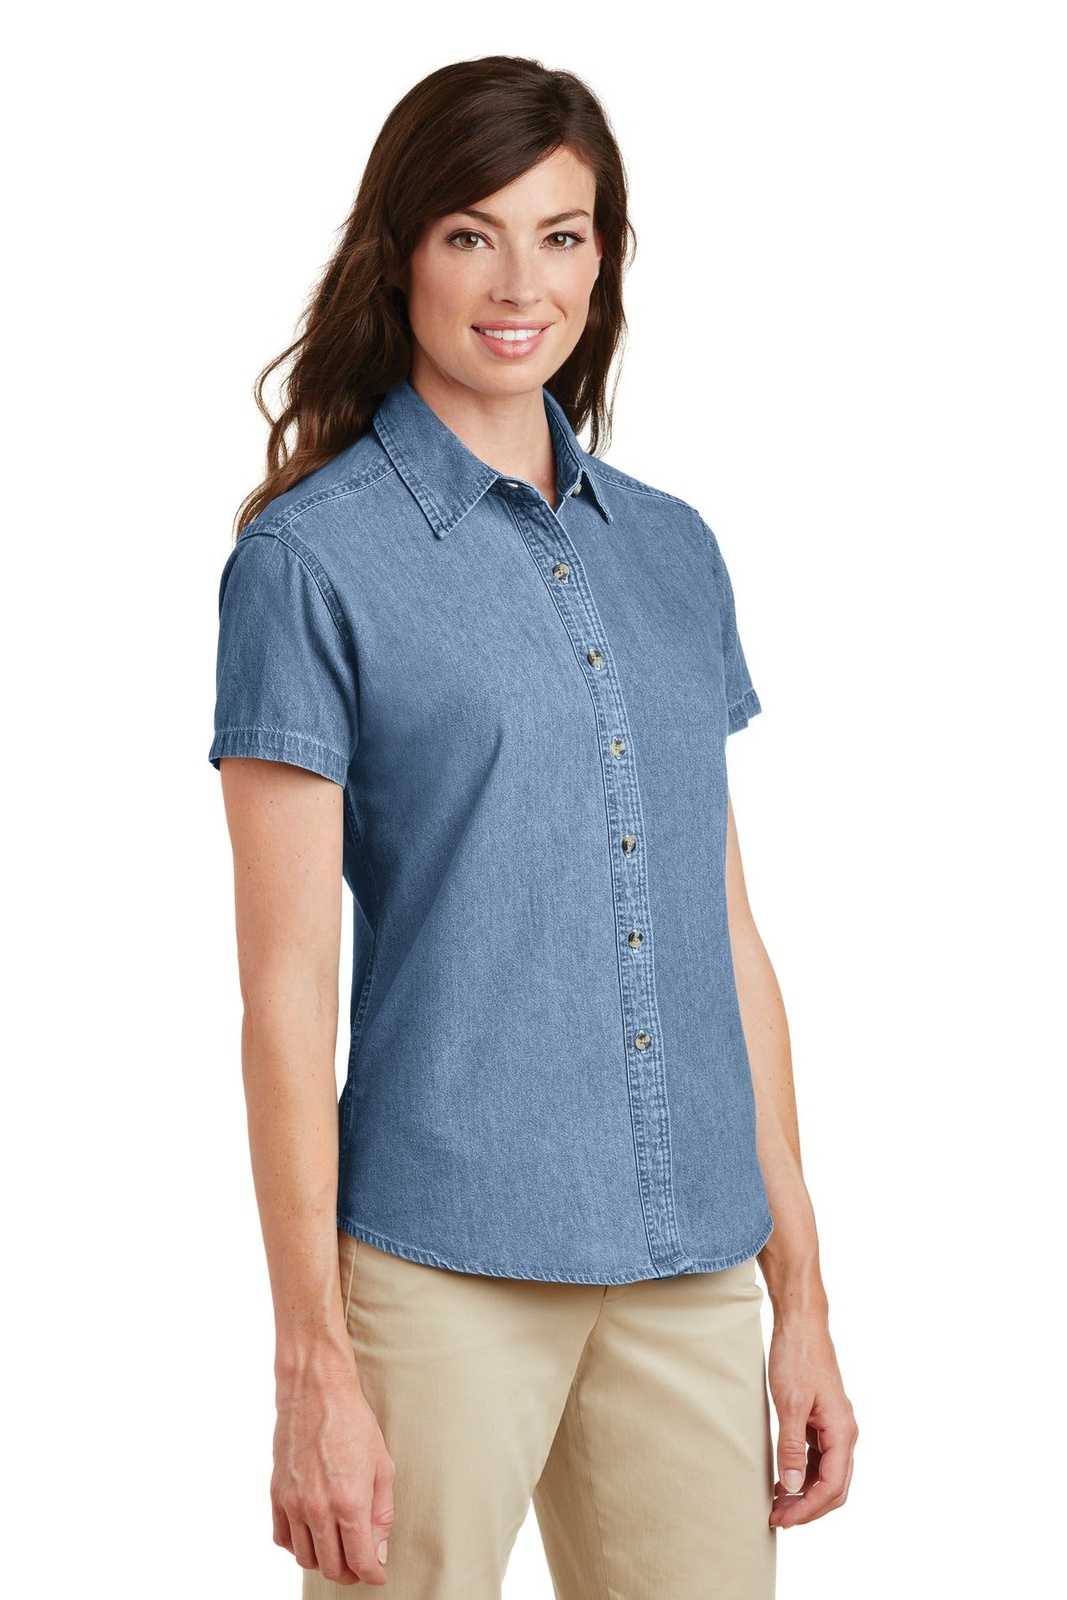 Port &amp; Company LSP11 Ladies Short Sleeve Value Denim Shirt - Faded Blue - HIT a Double - 4